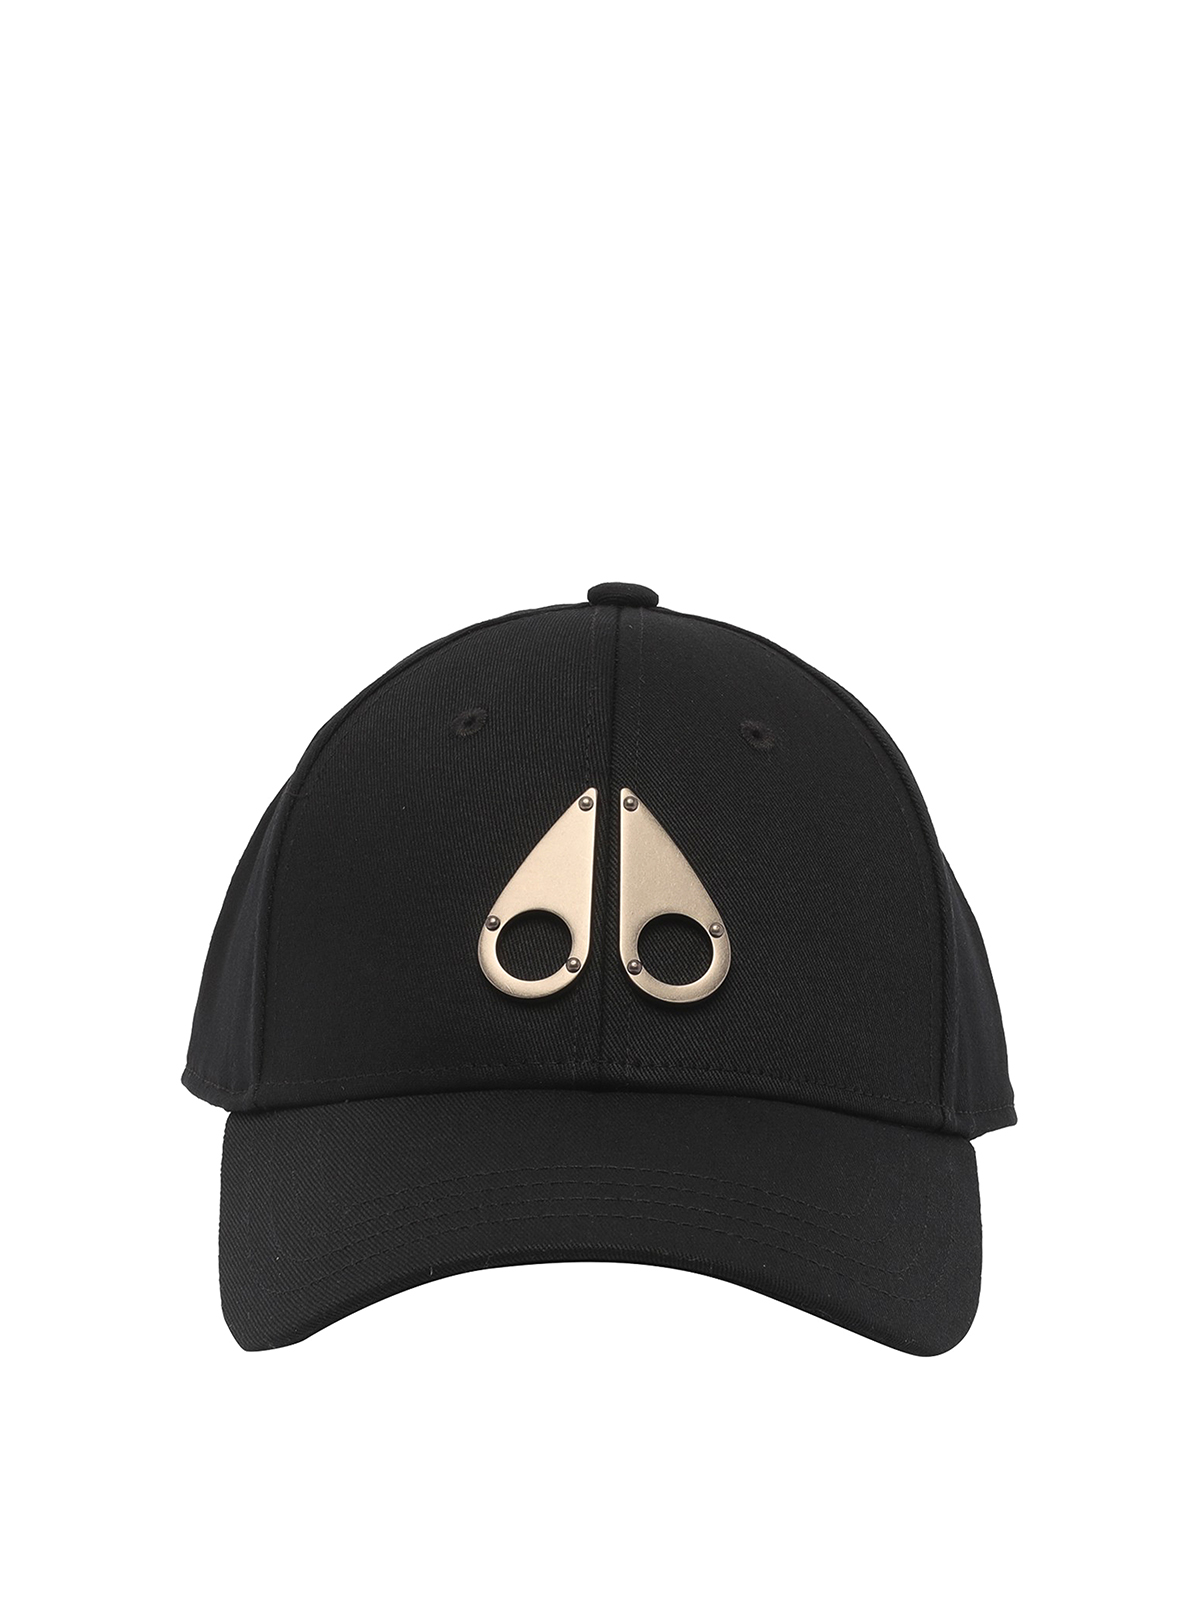 Moose Knuckles Baseball Cap With Frontal Silver Logo In Black